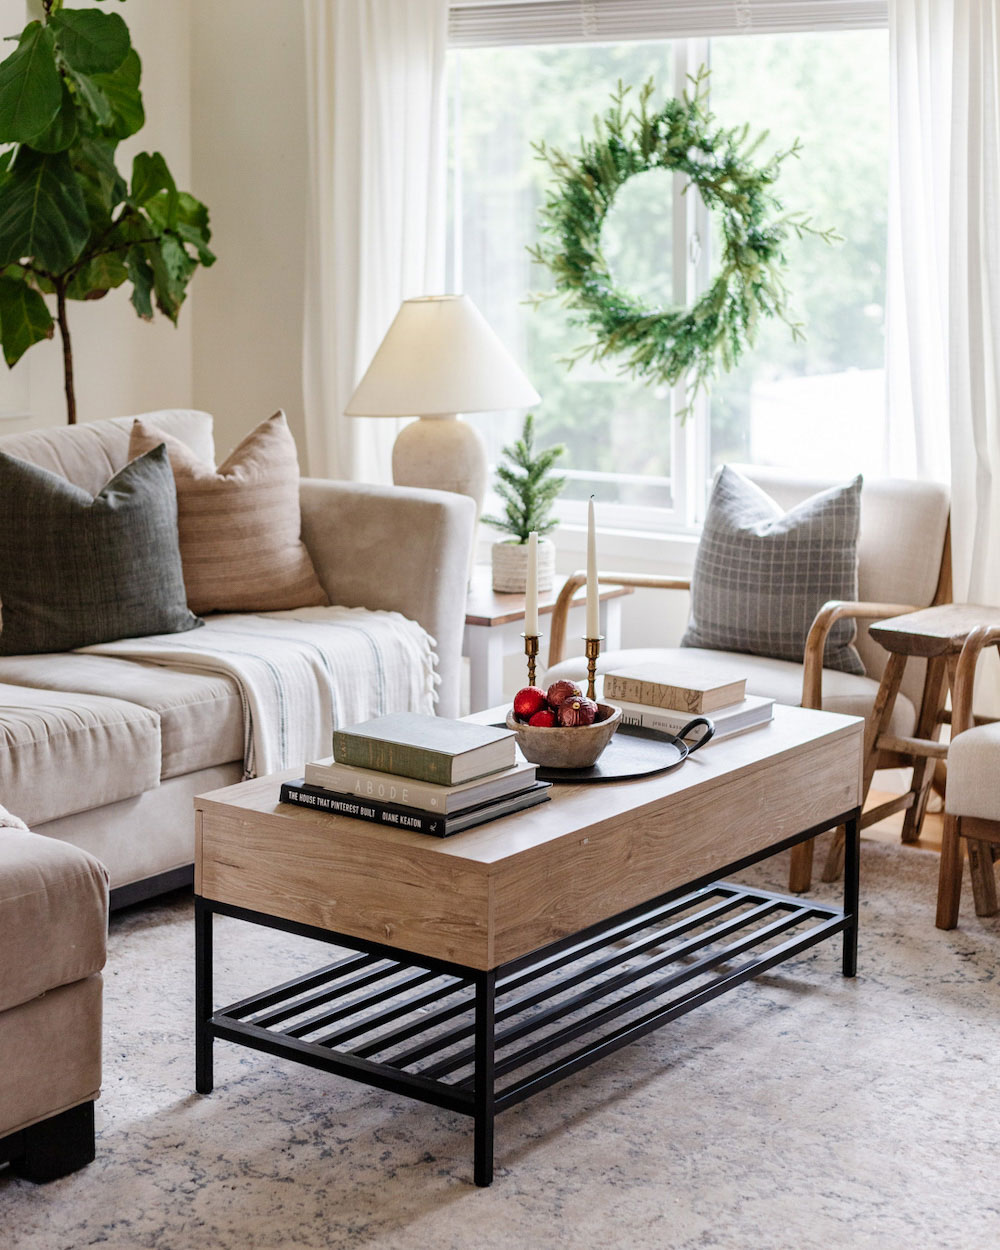 Center shot of a coffee table with beige furniture around it and a holiday wreath placed in the back window